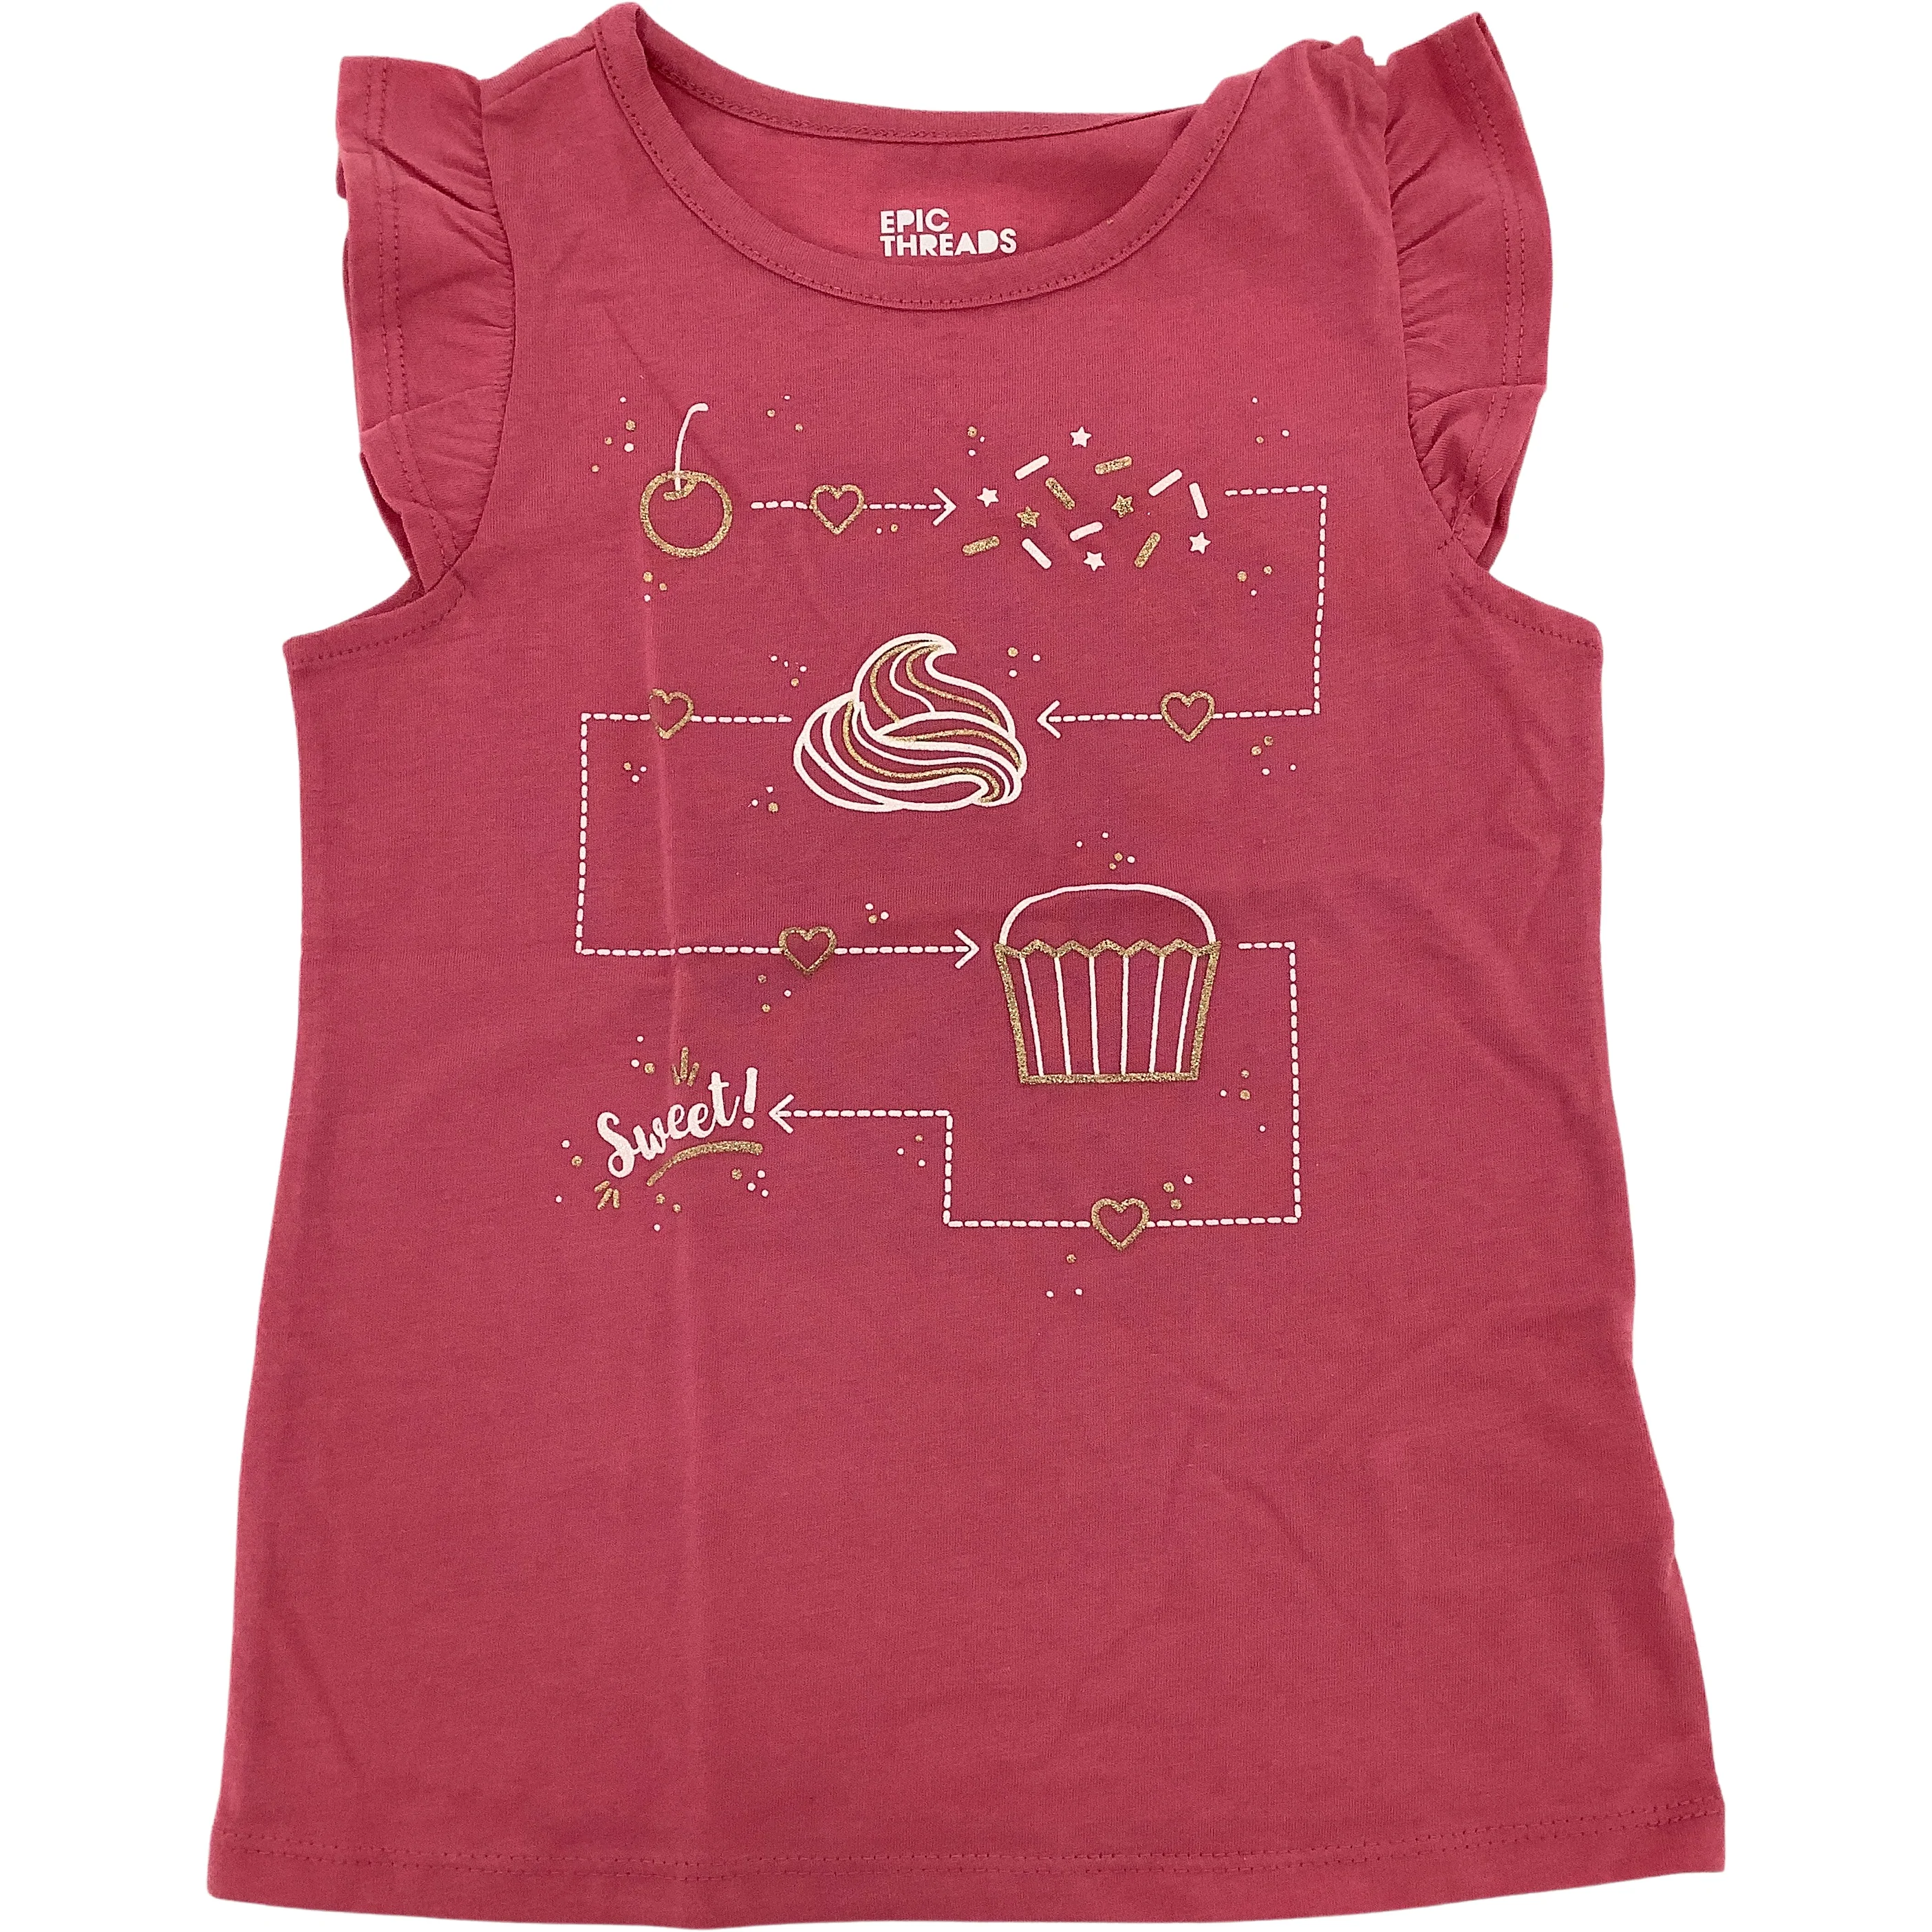 Epic Threads Girl's Sleeveless Shirt / Pink / Cupcake Theme / Kid's Summer Clothes / Various Sizes